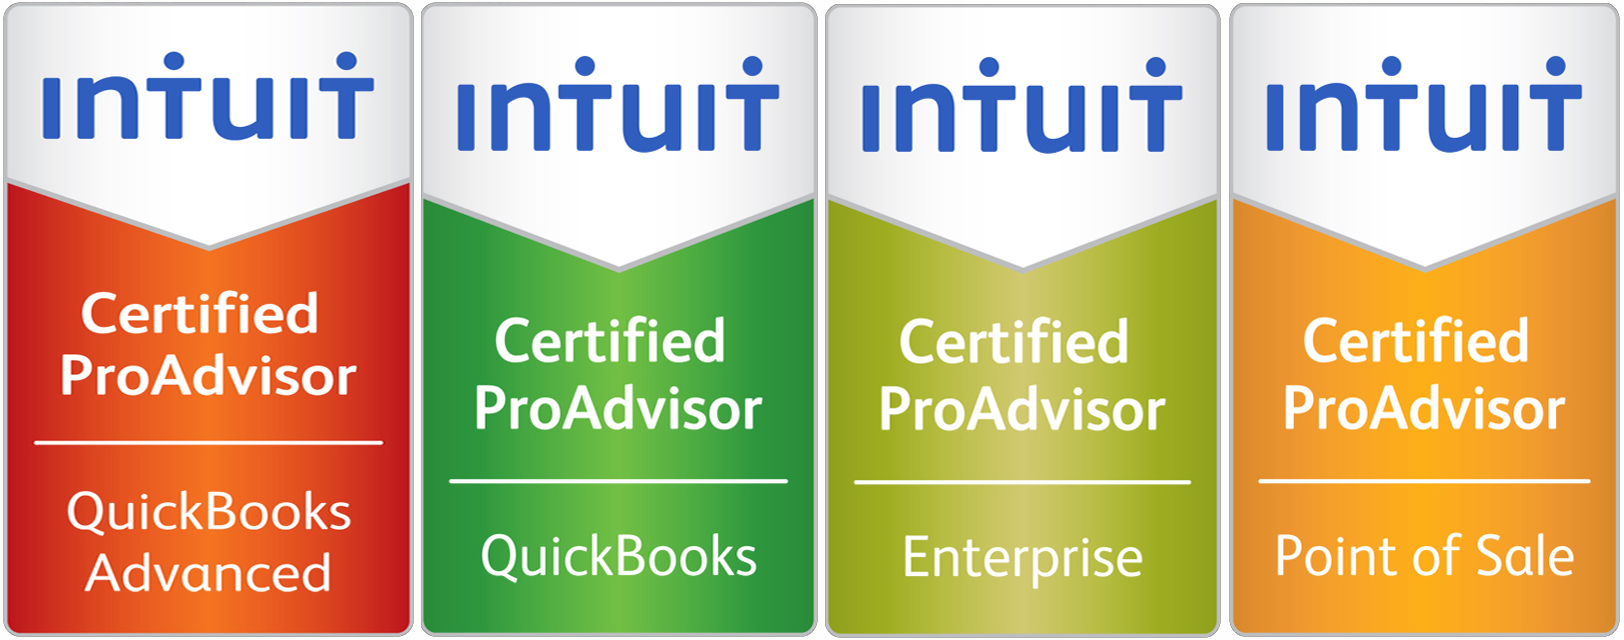 Intuit Certified Images